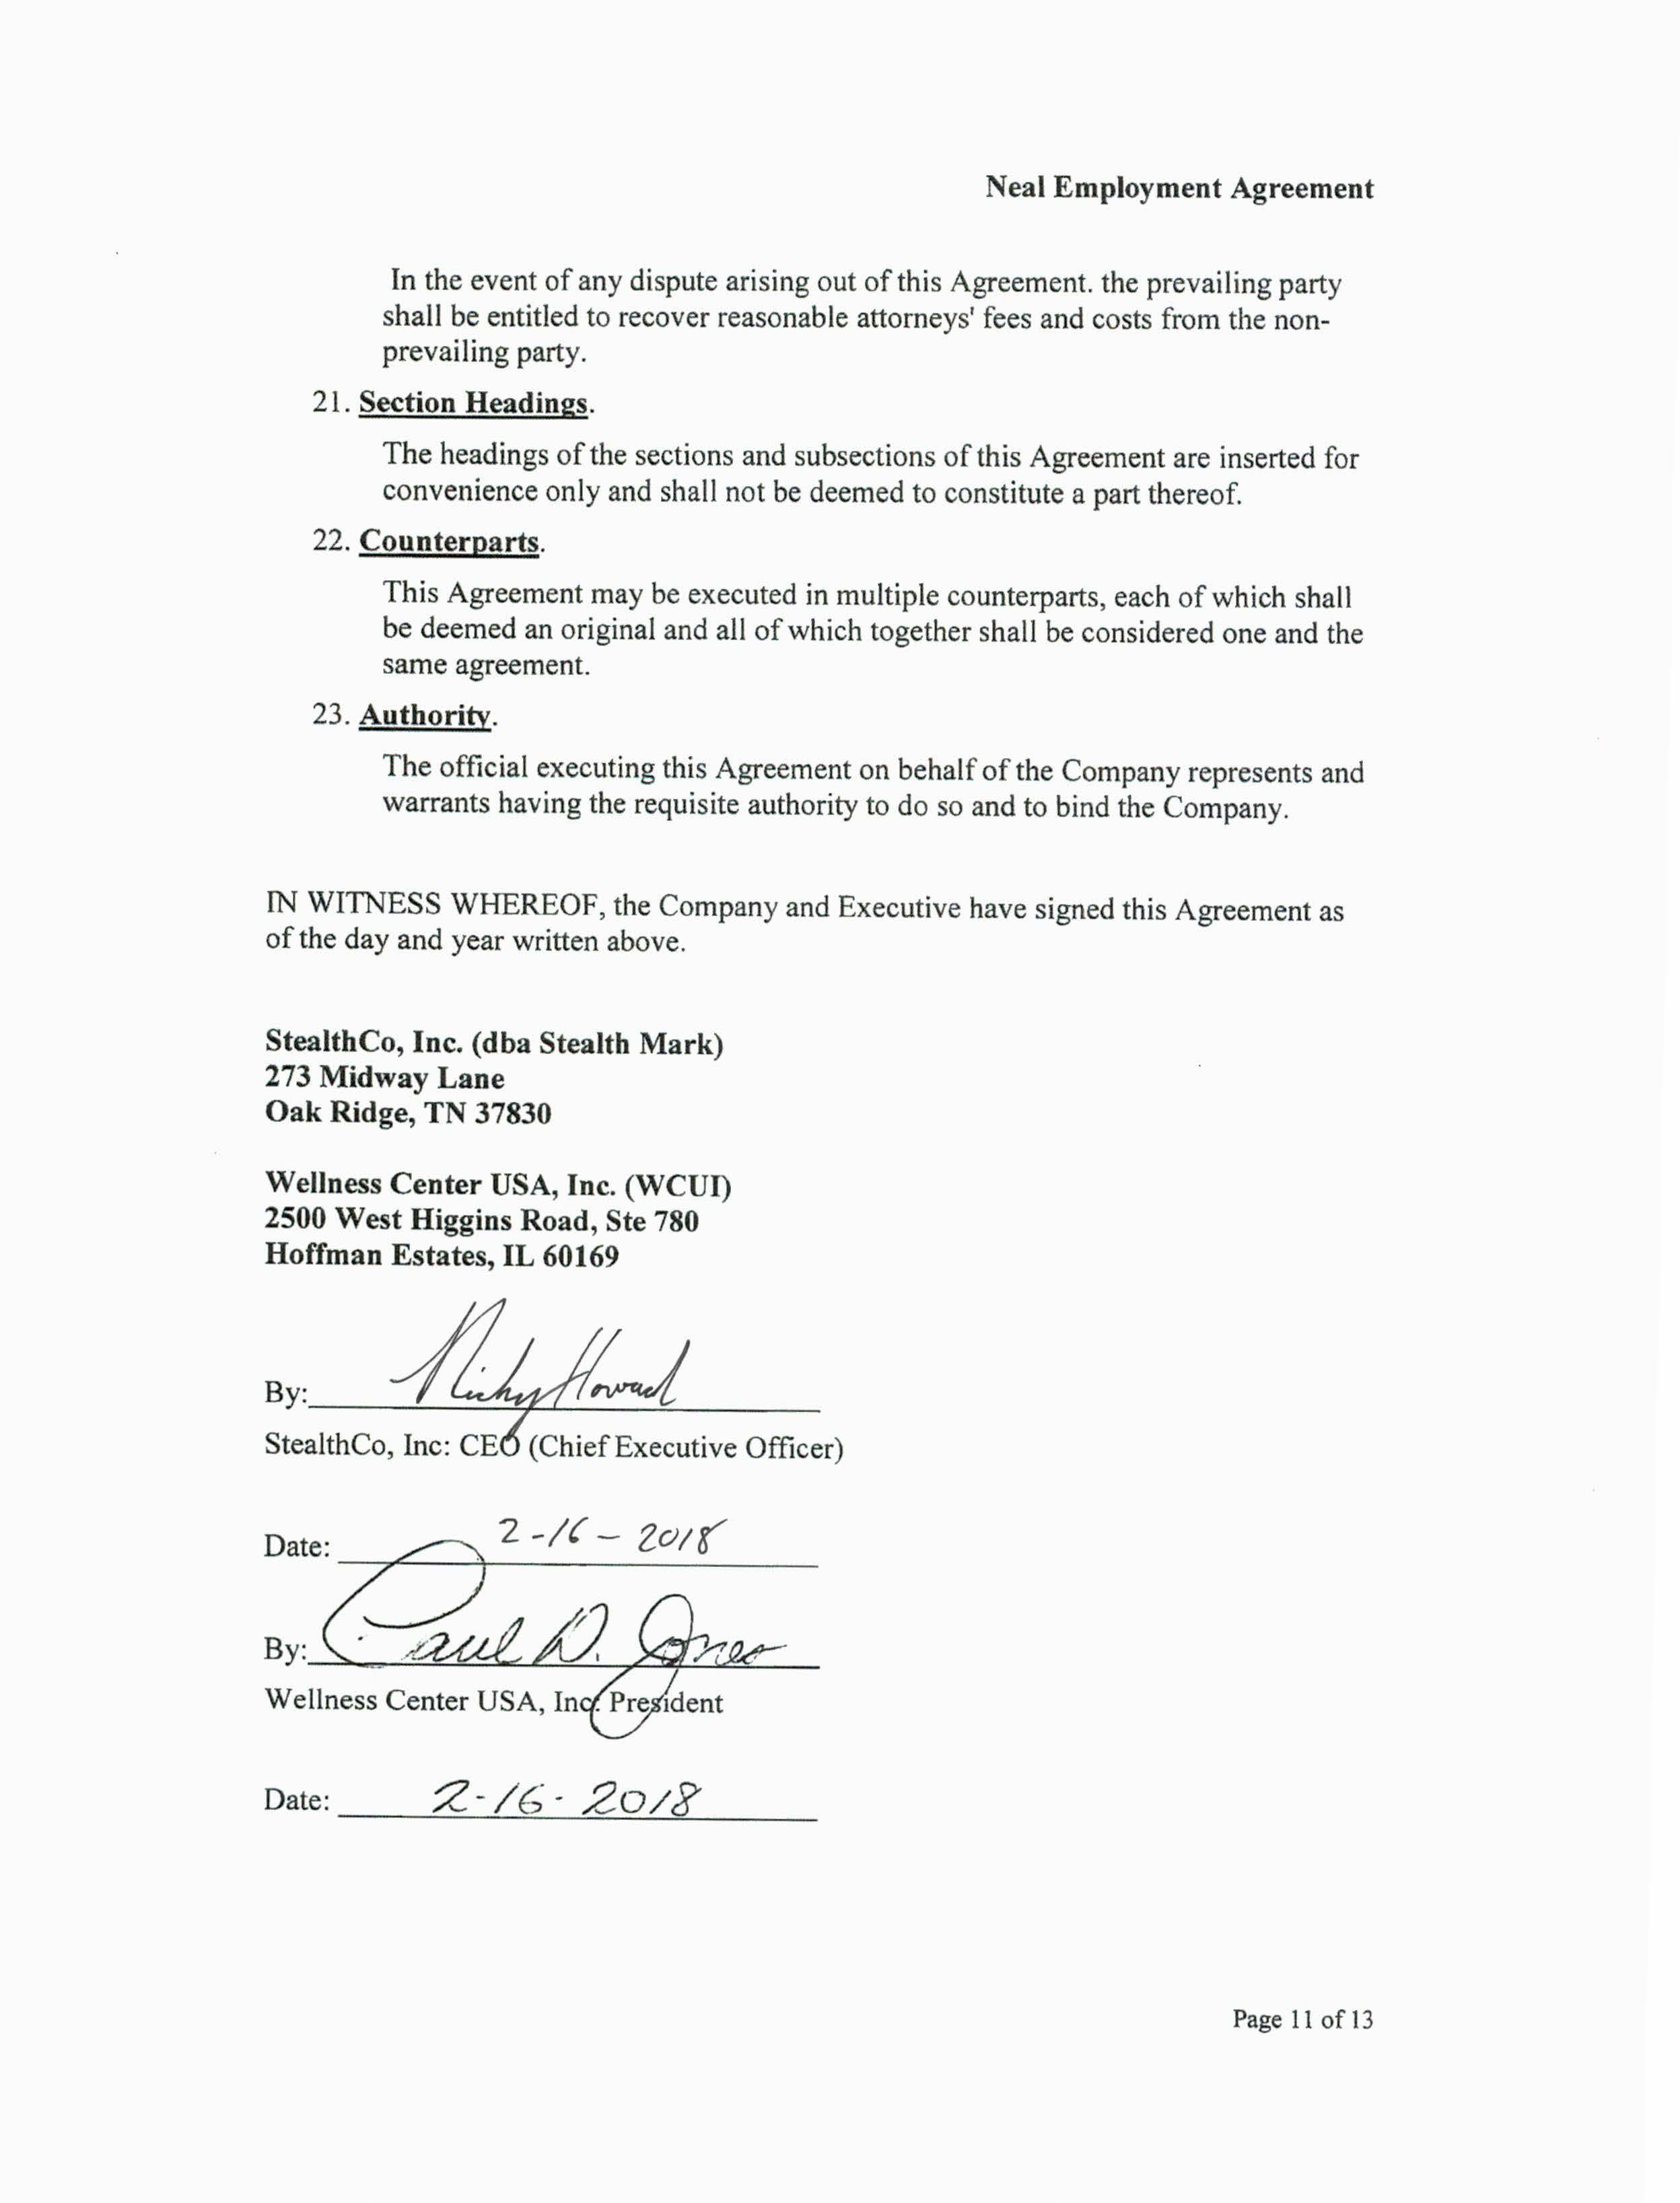 Rich Neal Employ Agree_final_signed (1) (1)_Page_11.jpg